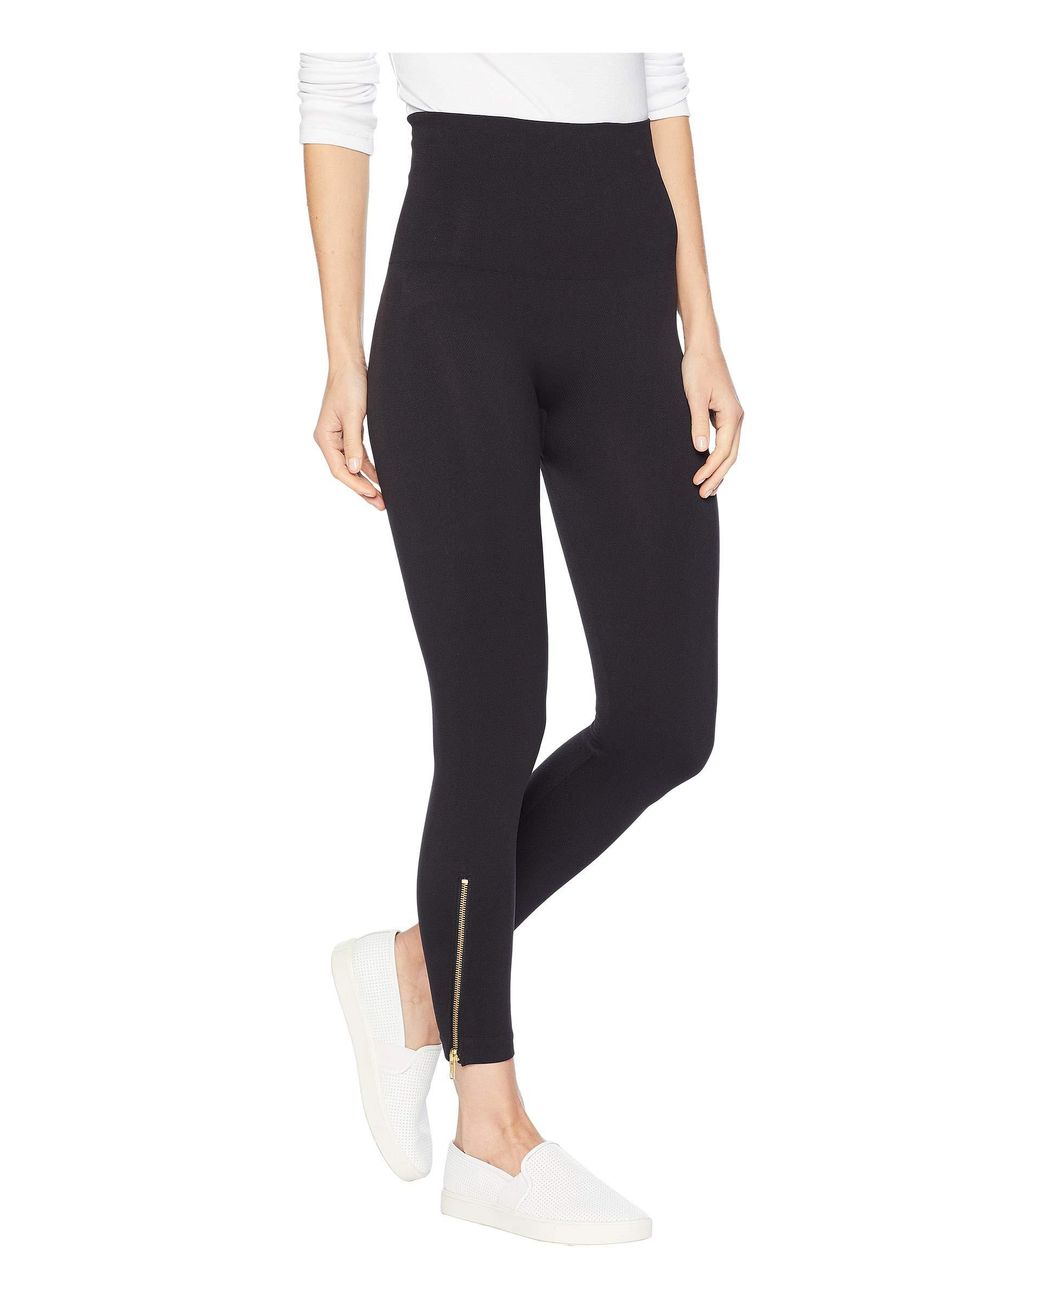 SPANX Look at Me Now Seamless Leggings Heather Charcoal LG 